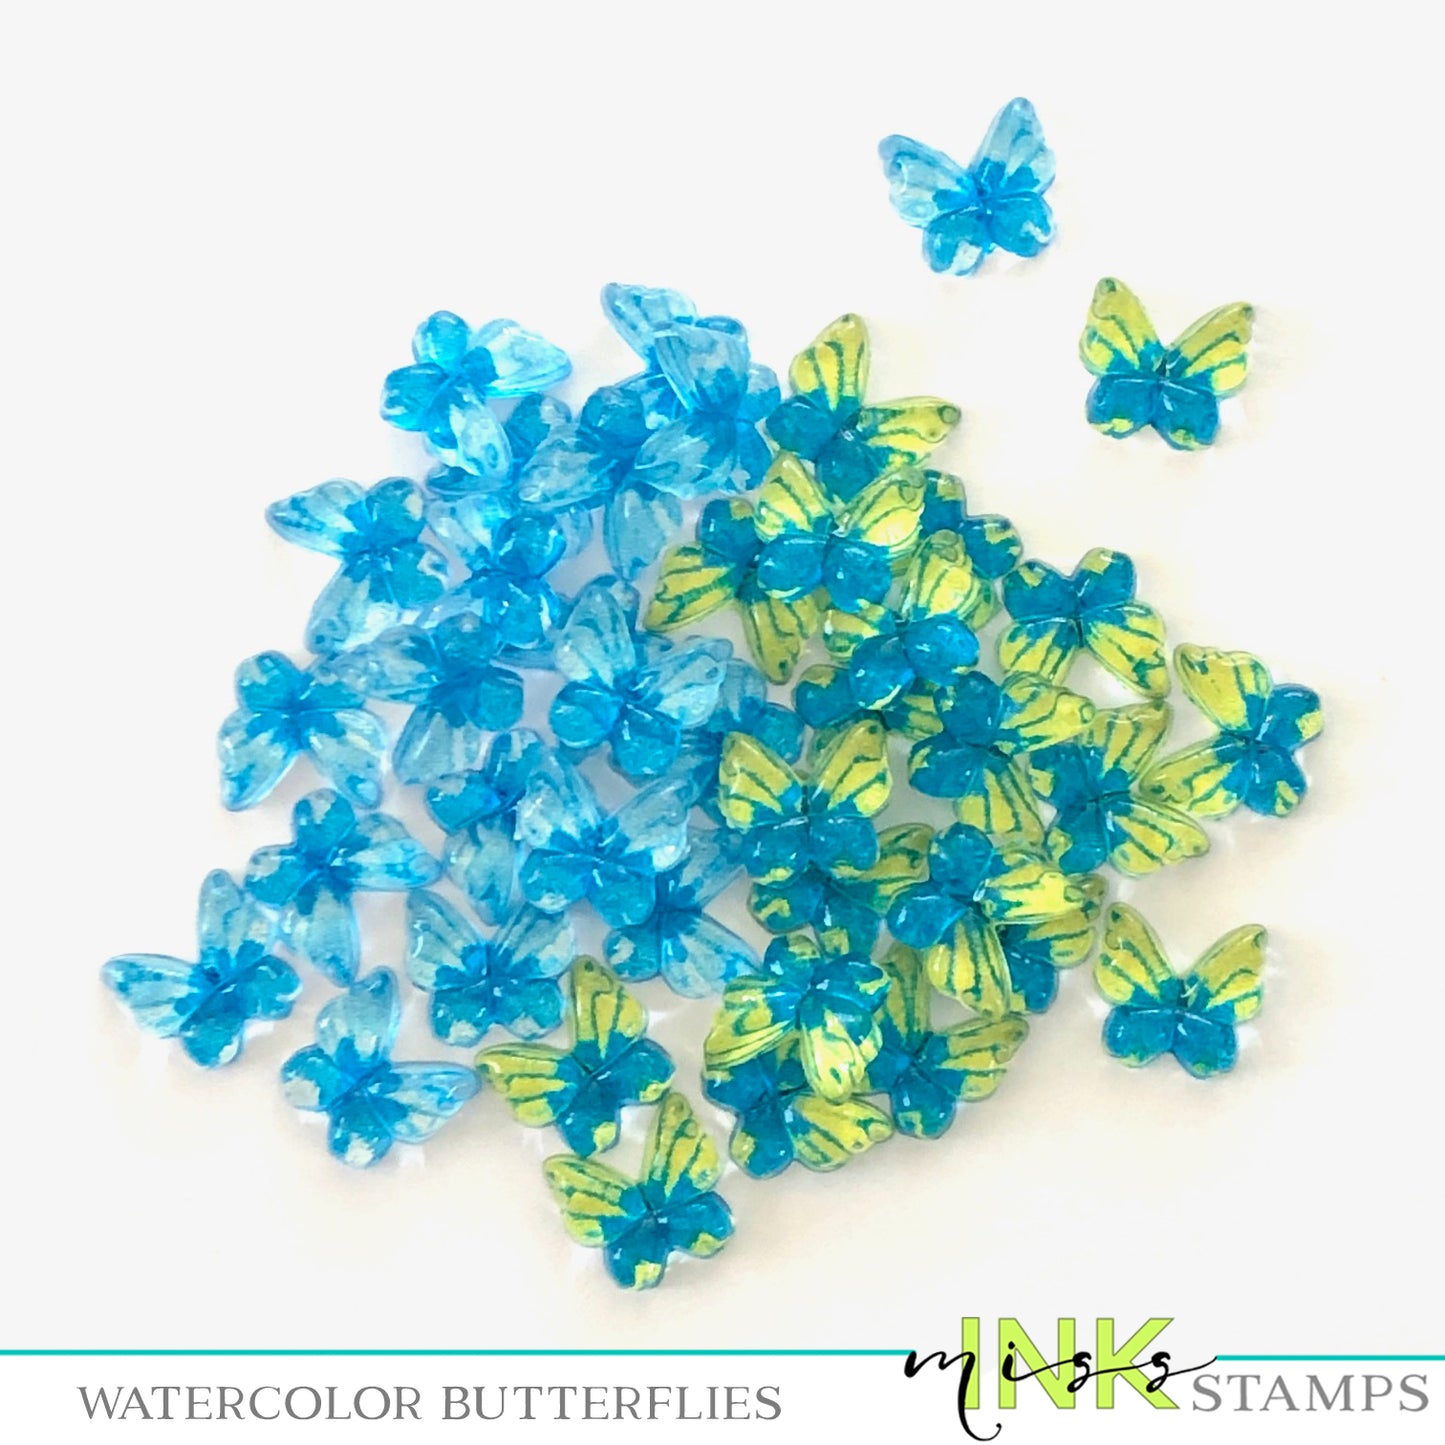 Watercolor Butterflies--Blue and Yellows